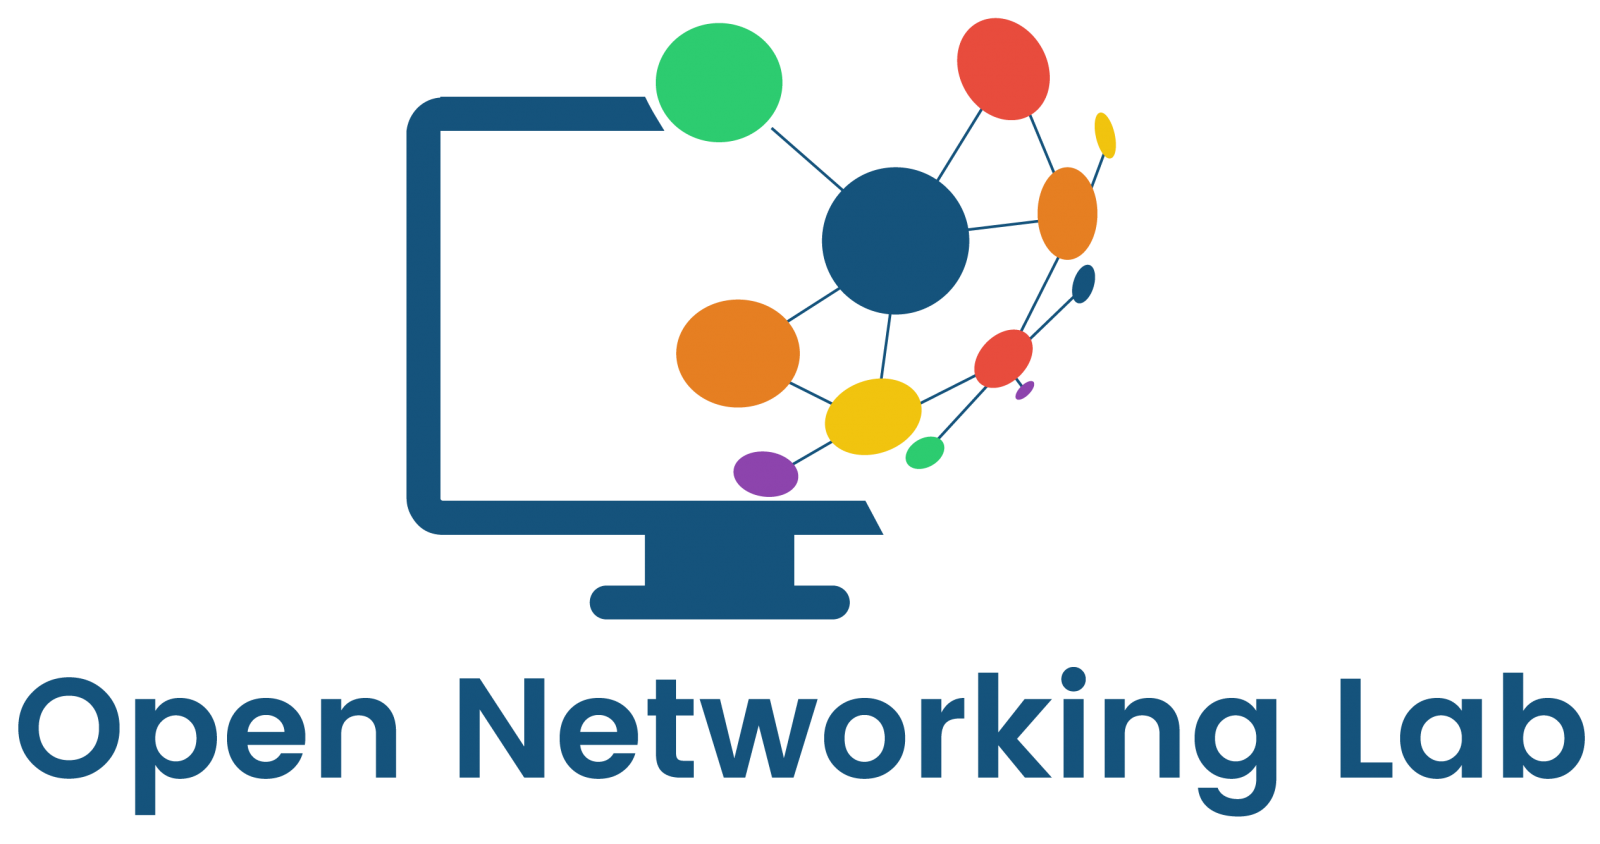 The OpenNetworking Laboratory icon that shows a drawing of a computer monitor that has most of the right-hand side replaced with different colour and size dots connected with blue lines to represent an interconnected network. The text Open Networking Lab is underneath the image.